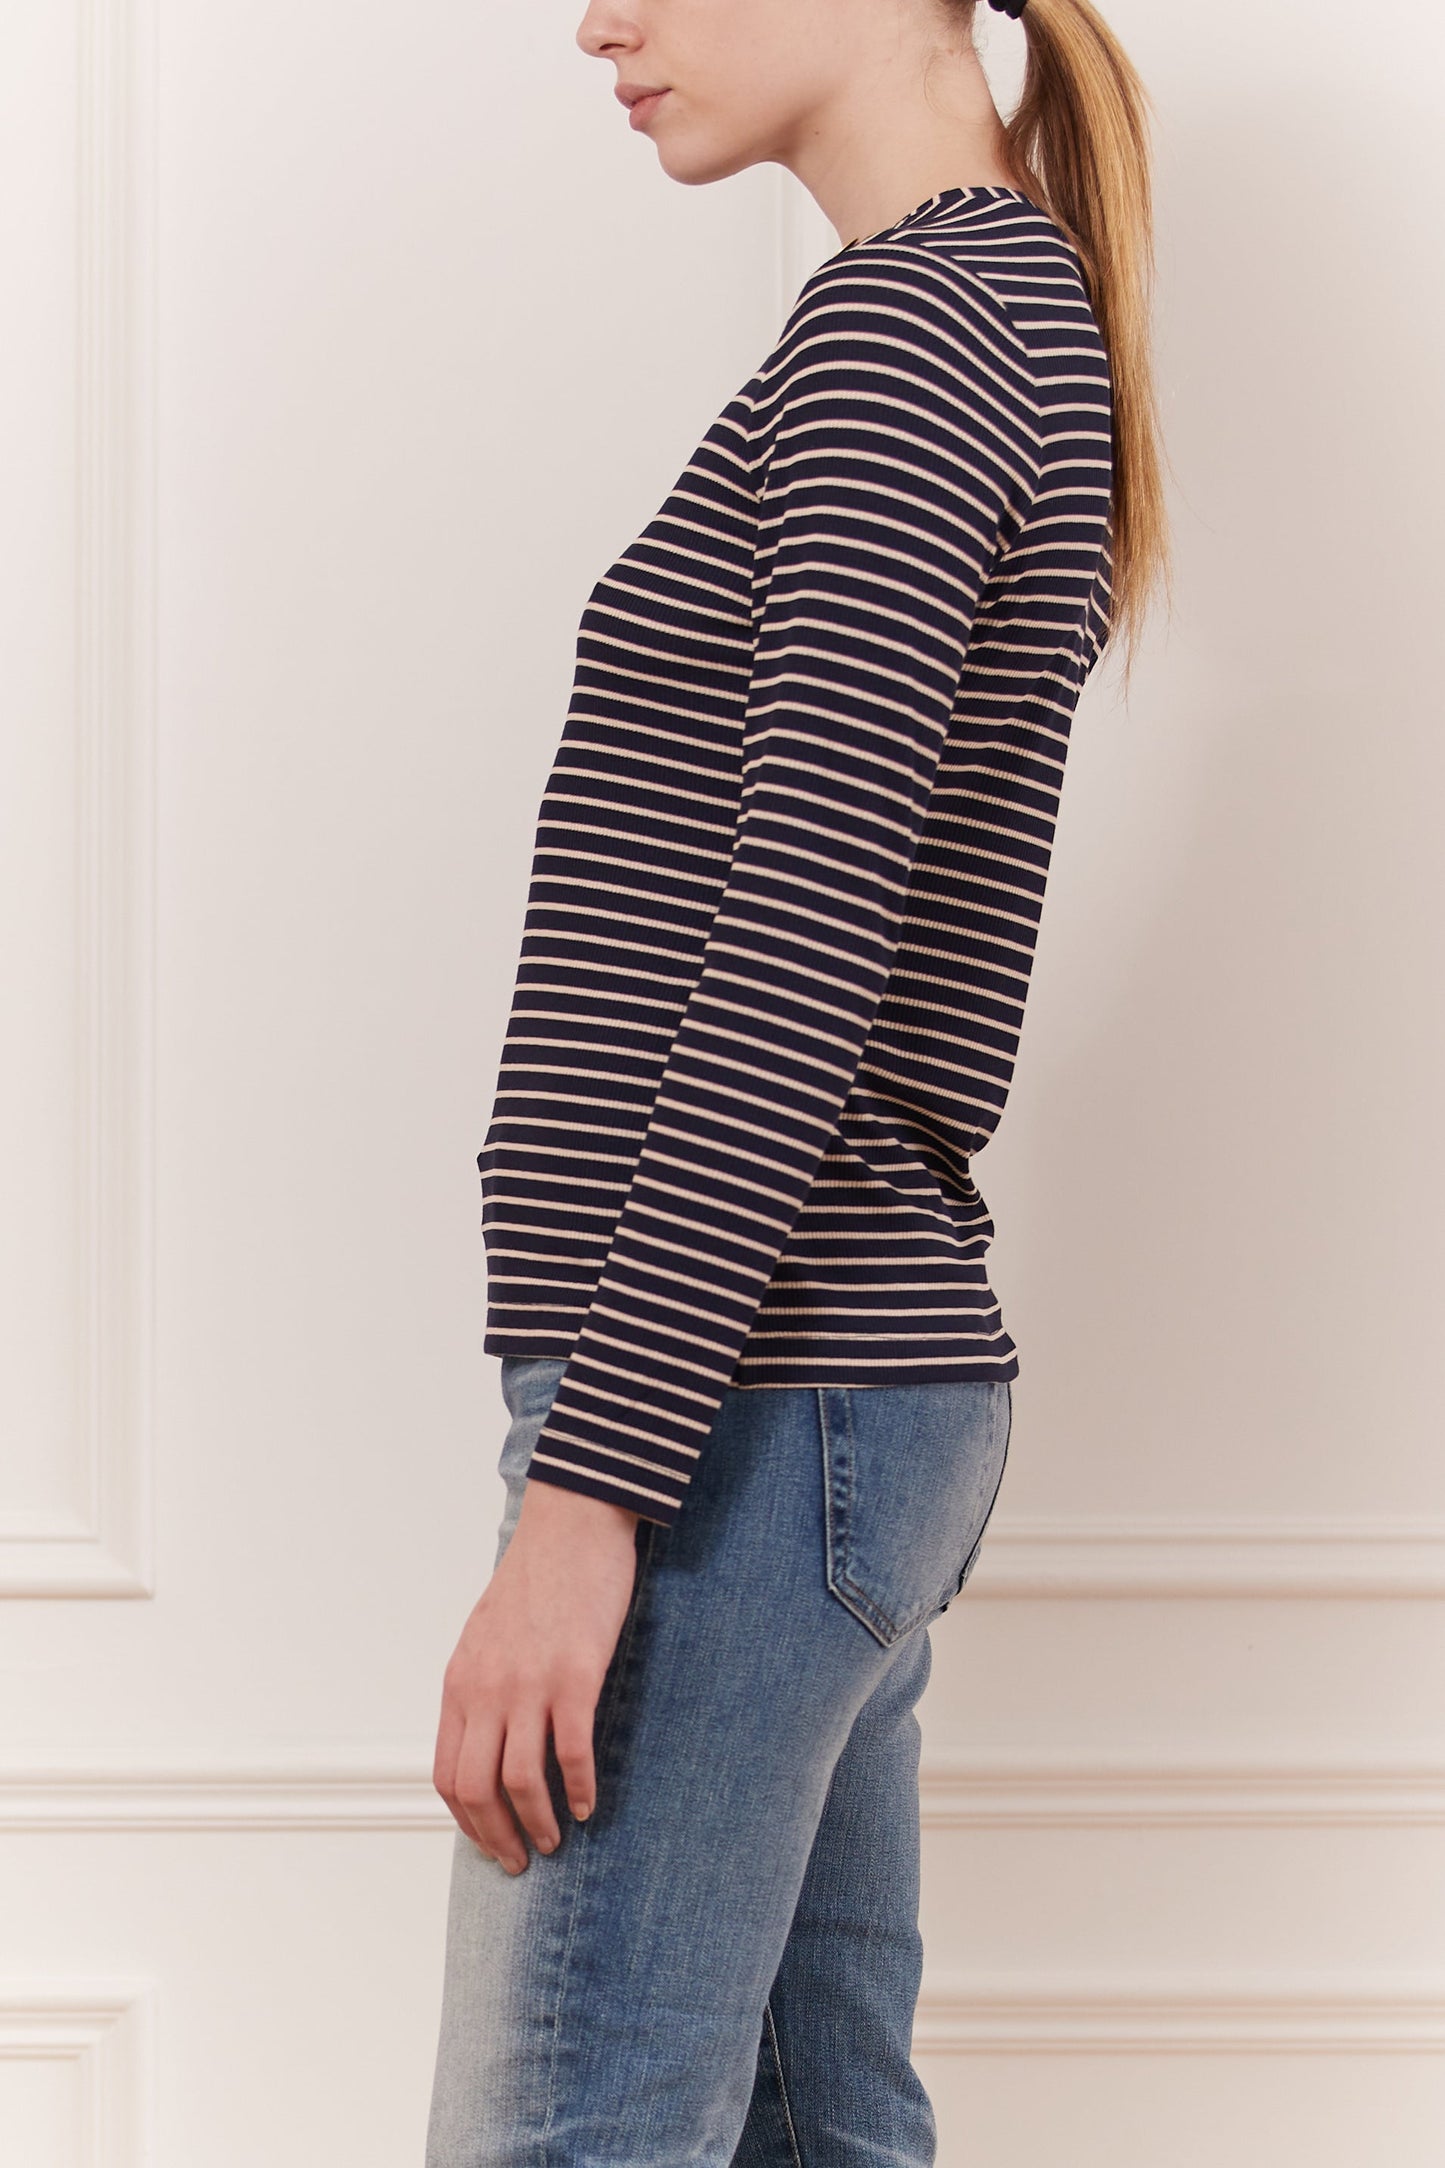 Crew neck top with shoulder buttons